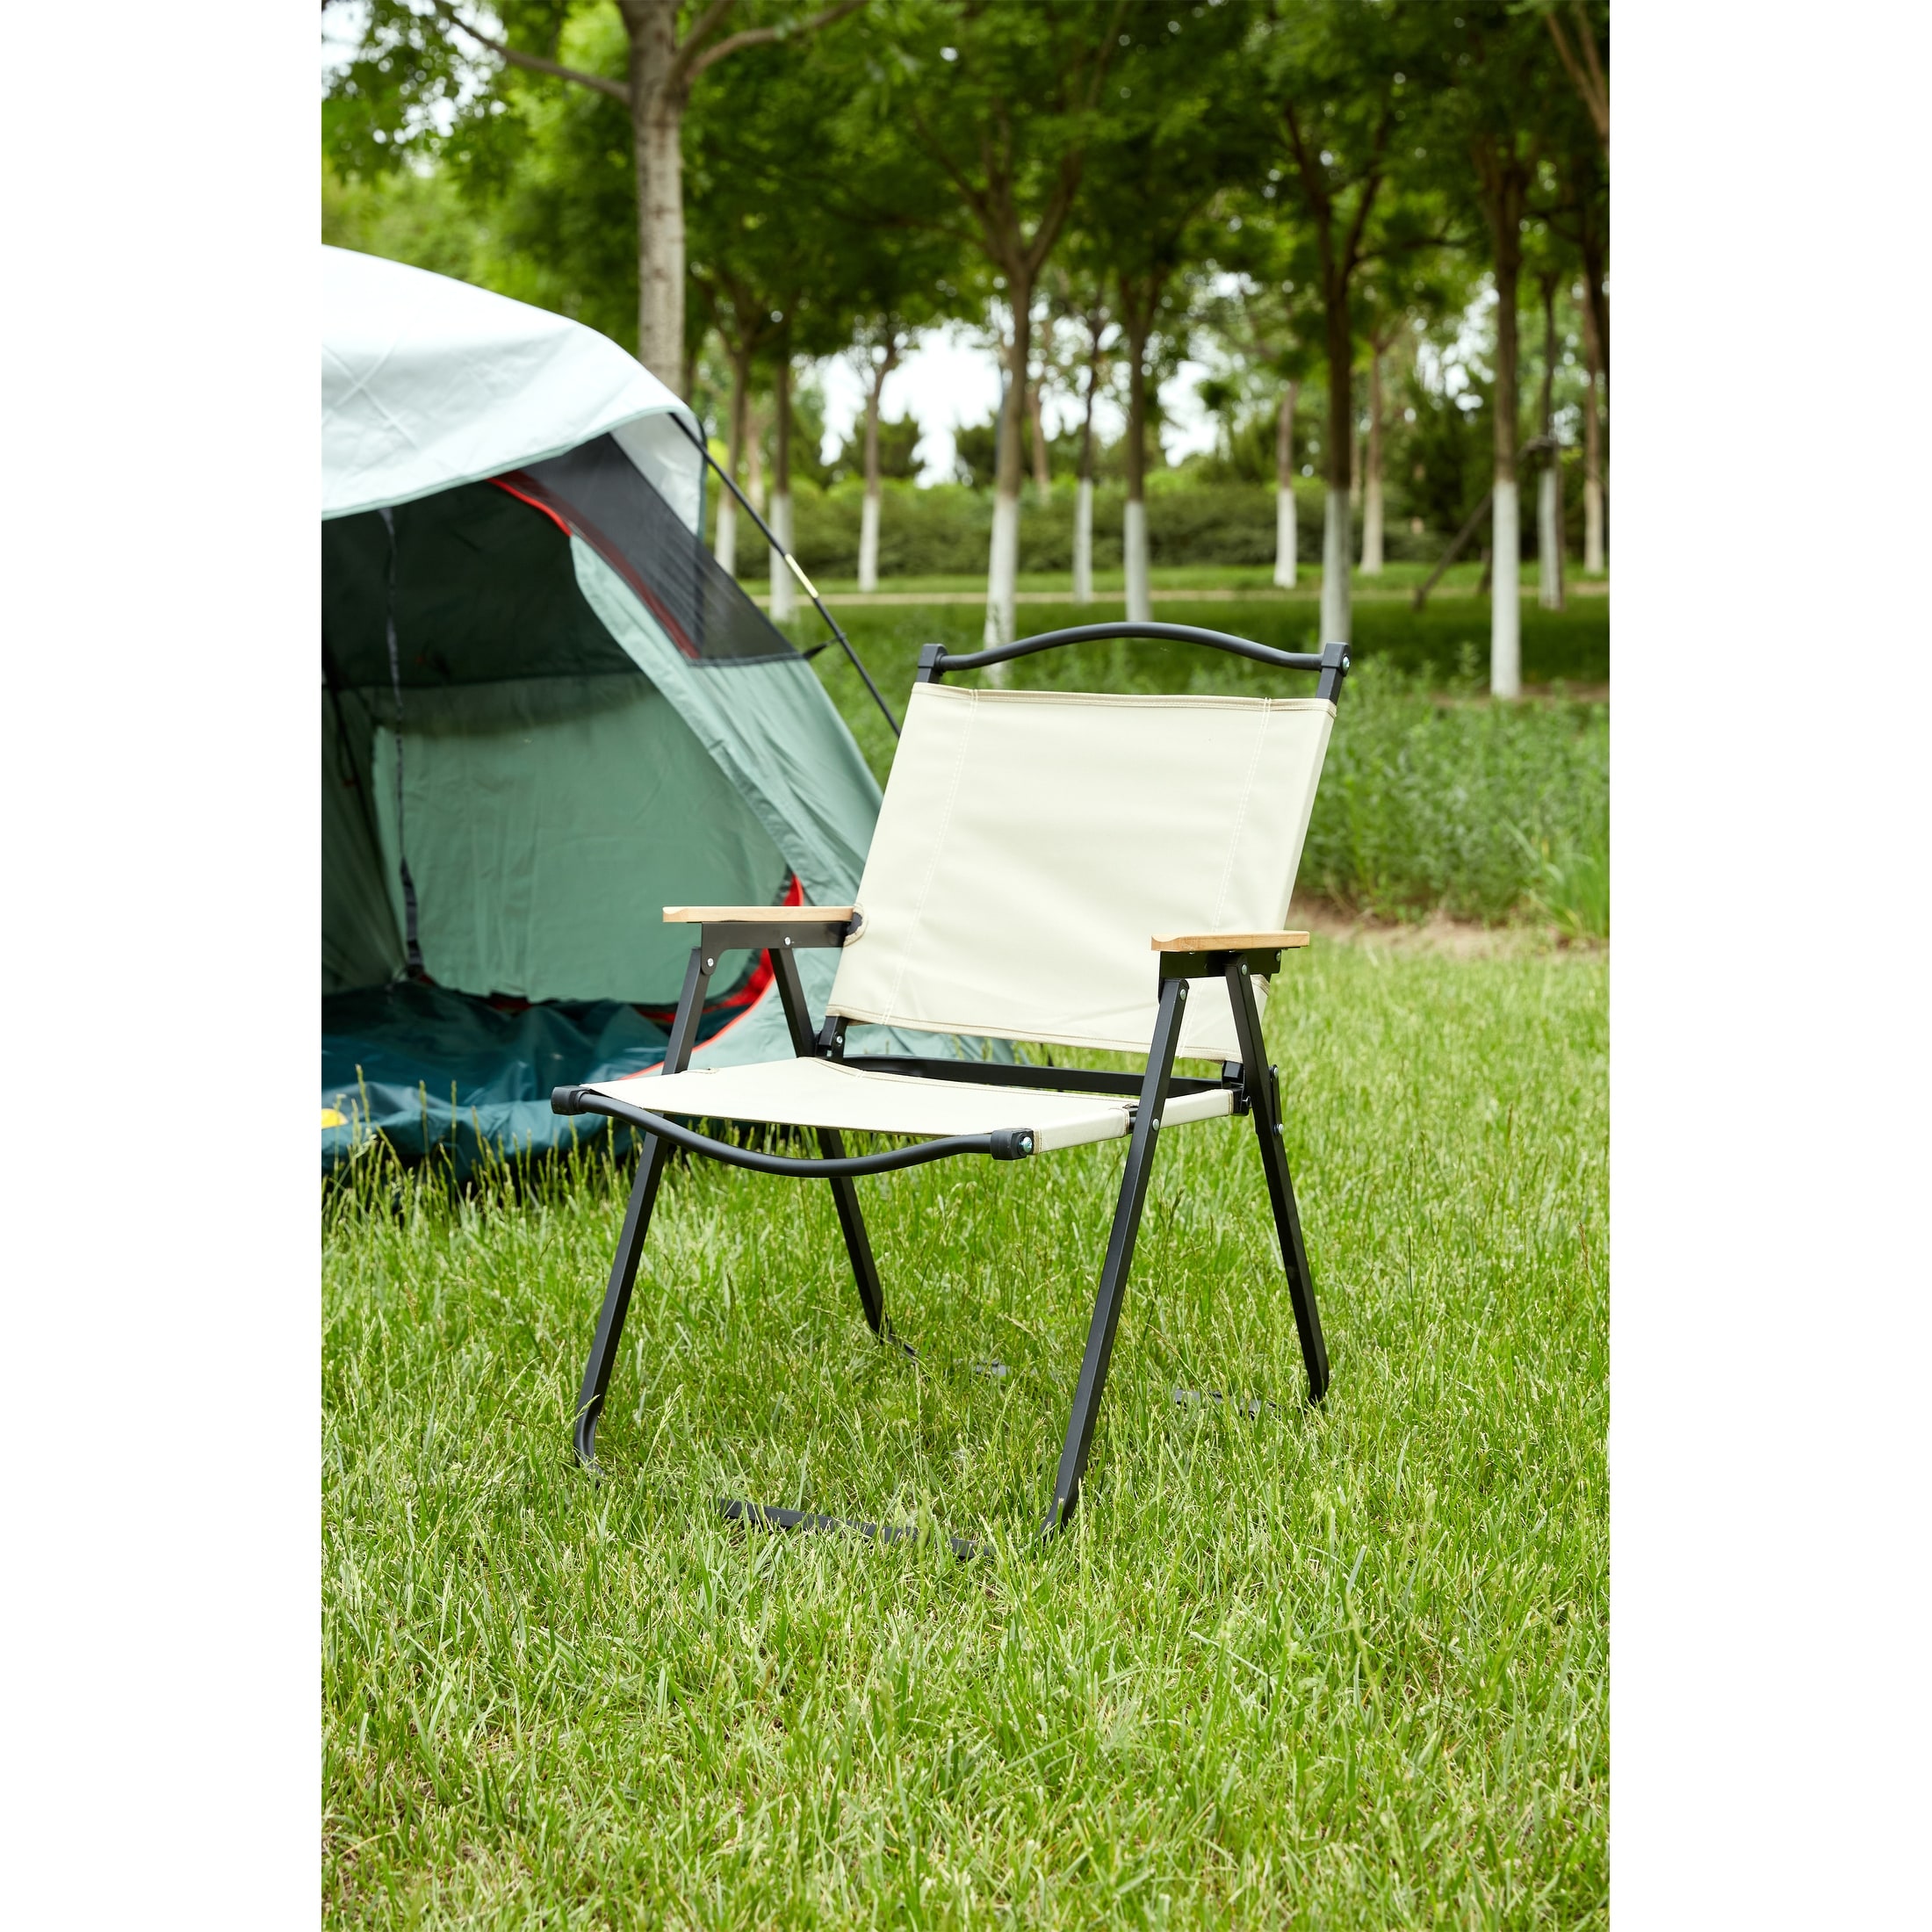 Beige Outdoor Folding Chair For Camping Picnics And Bbq